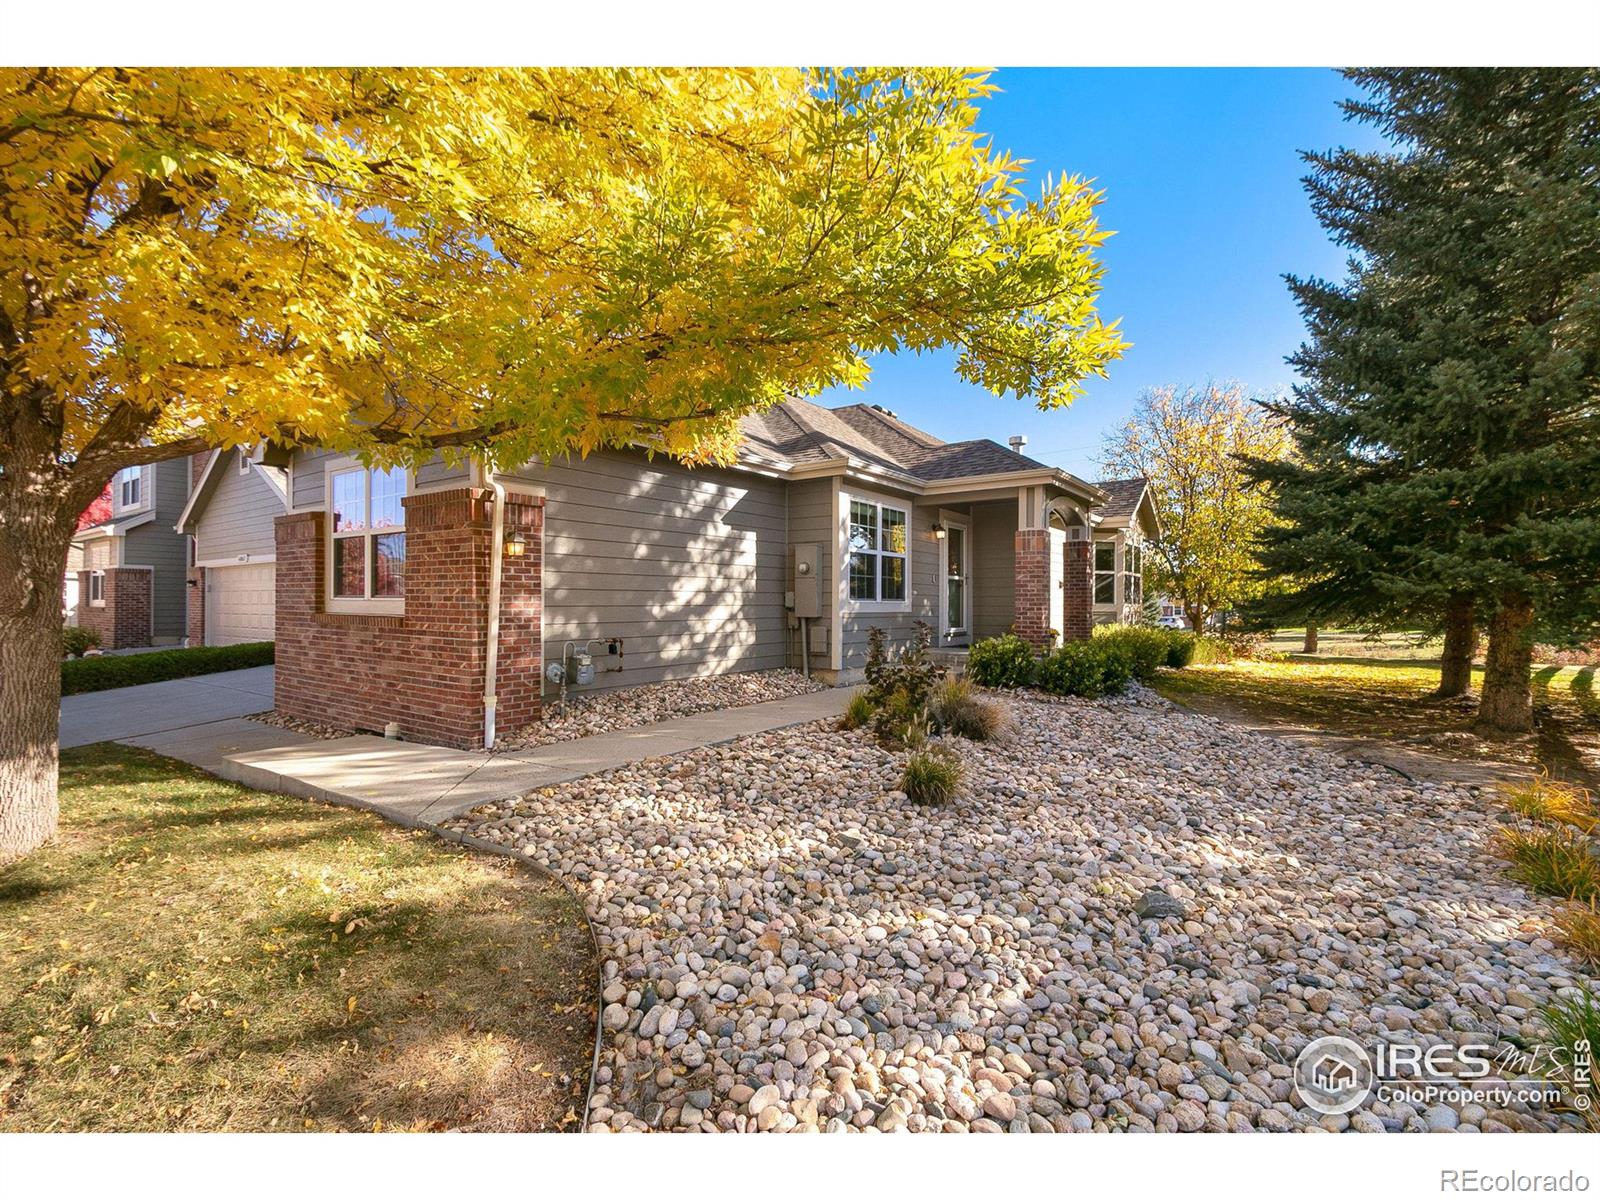 4064  don fox circle, Loveland sold home. Closed on 2024-03-15 for $517,500.